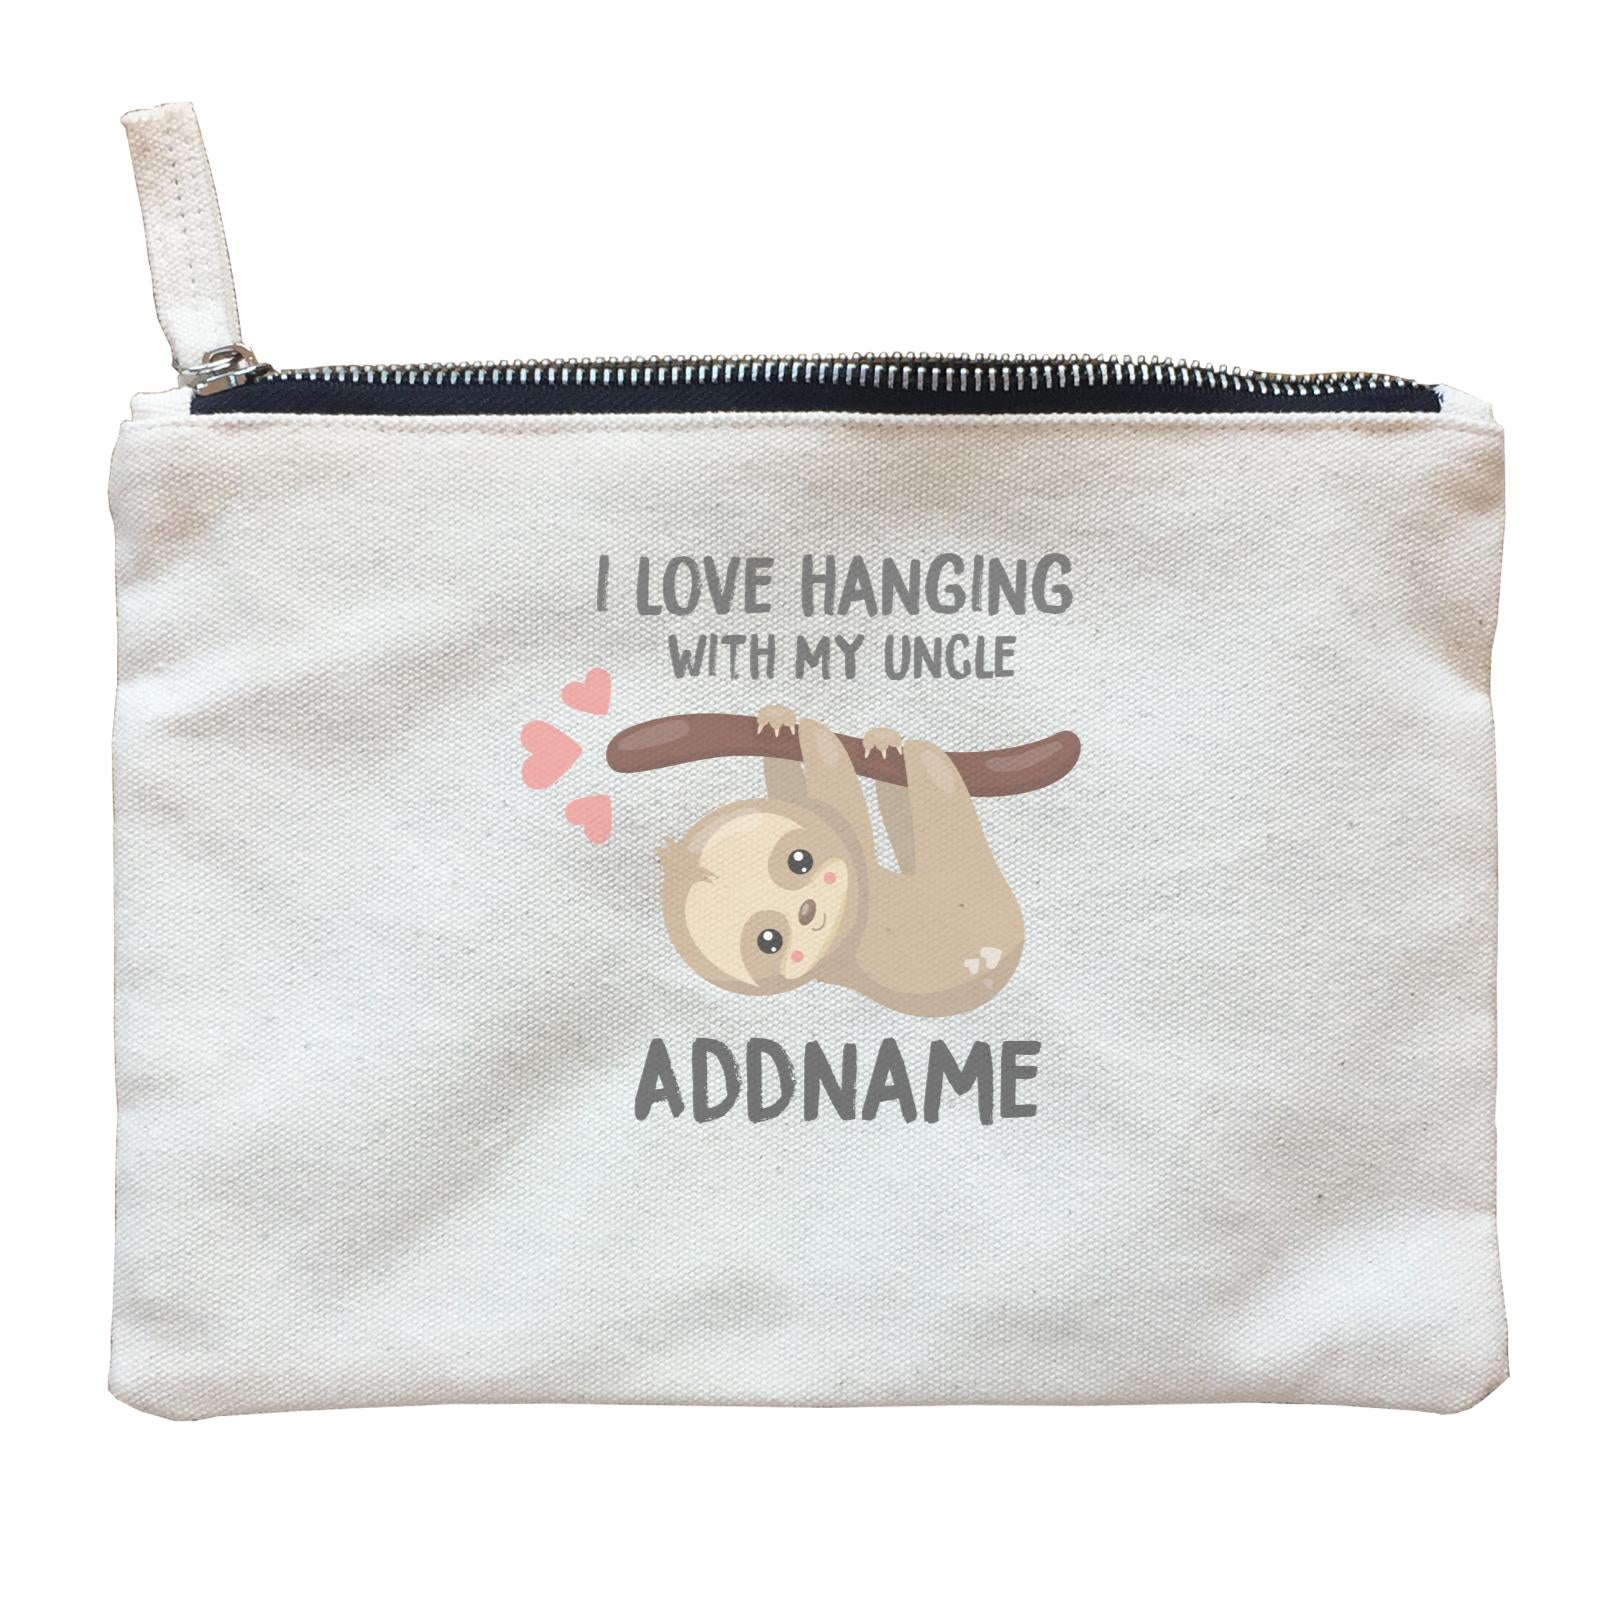 Cute Sloth I Love Hanging With My Uncle Addname Zipper Pouch